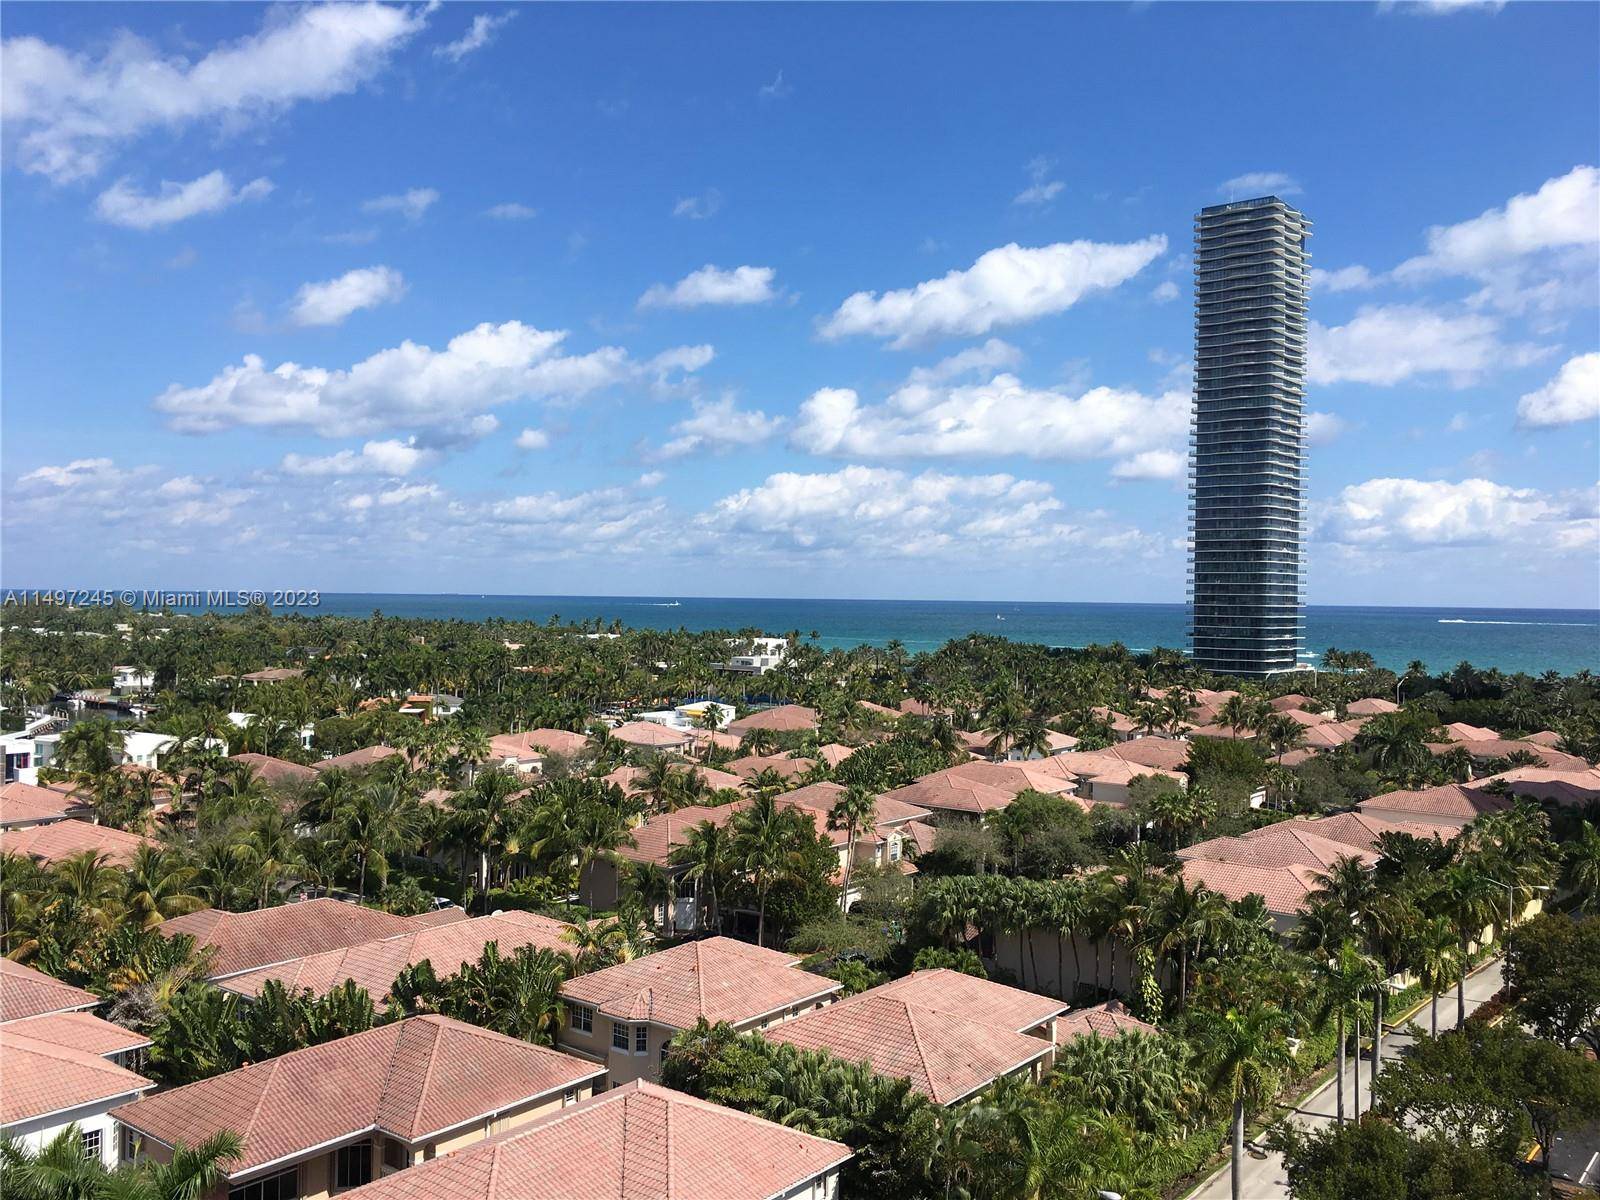 Undeniably the best line in the building with unobstructed ocean and intracoastal views, overlooking Golden Beach and Hallandale Beach's skyline.